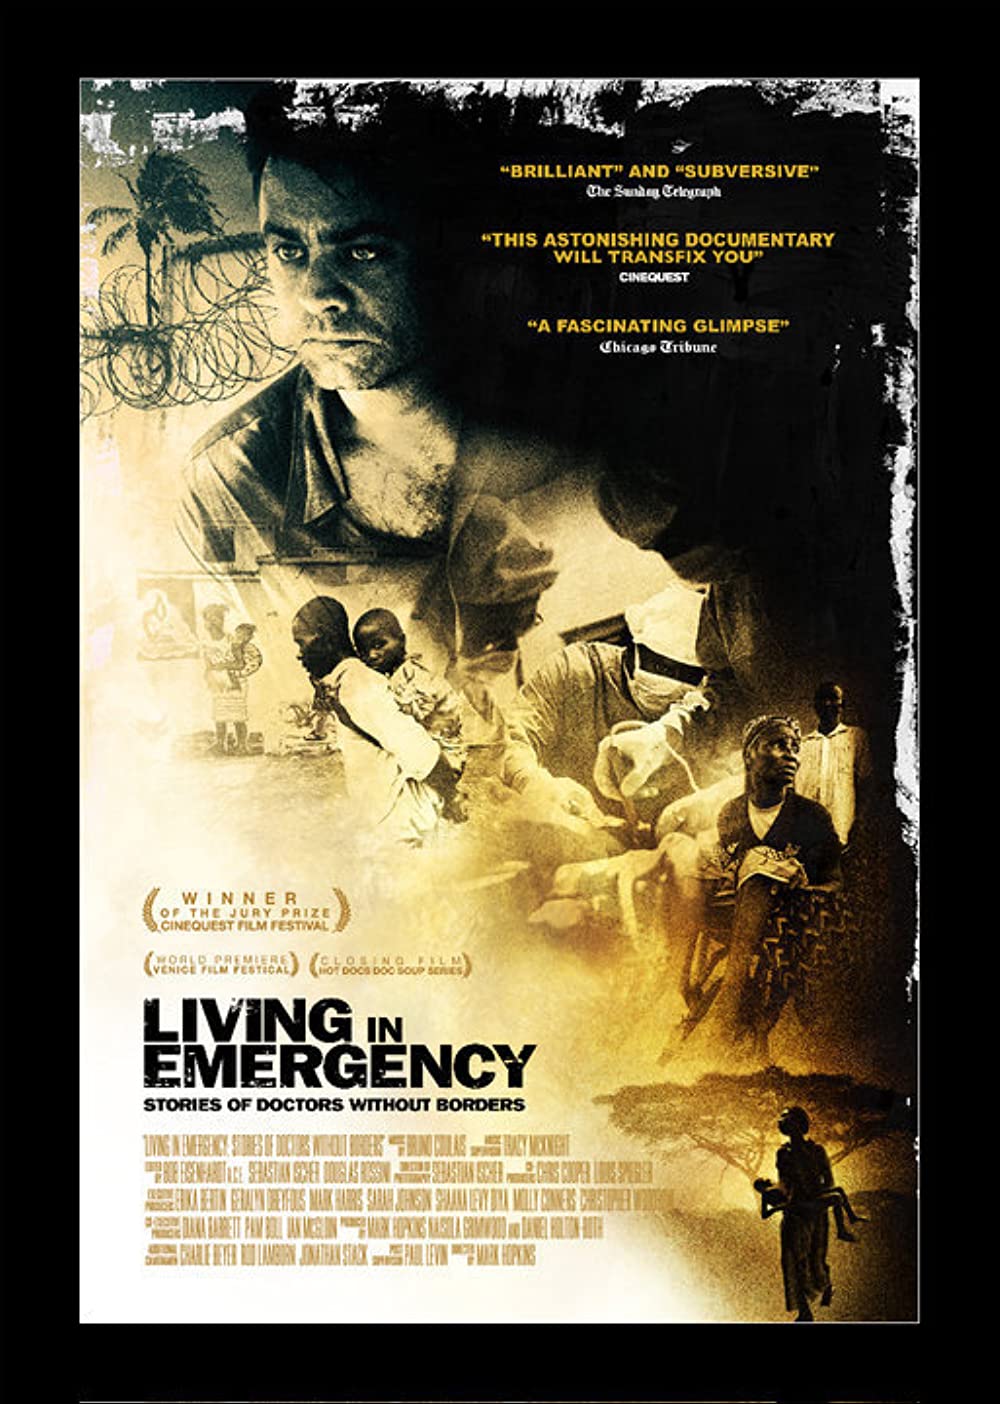 Filmbeschreibung zu Living in Emergency: Stories of Doctors Without Borders